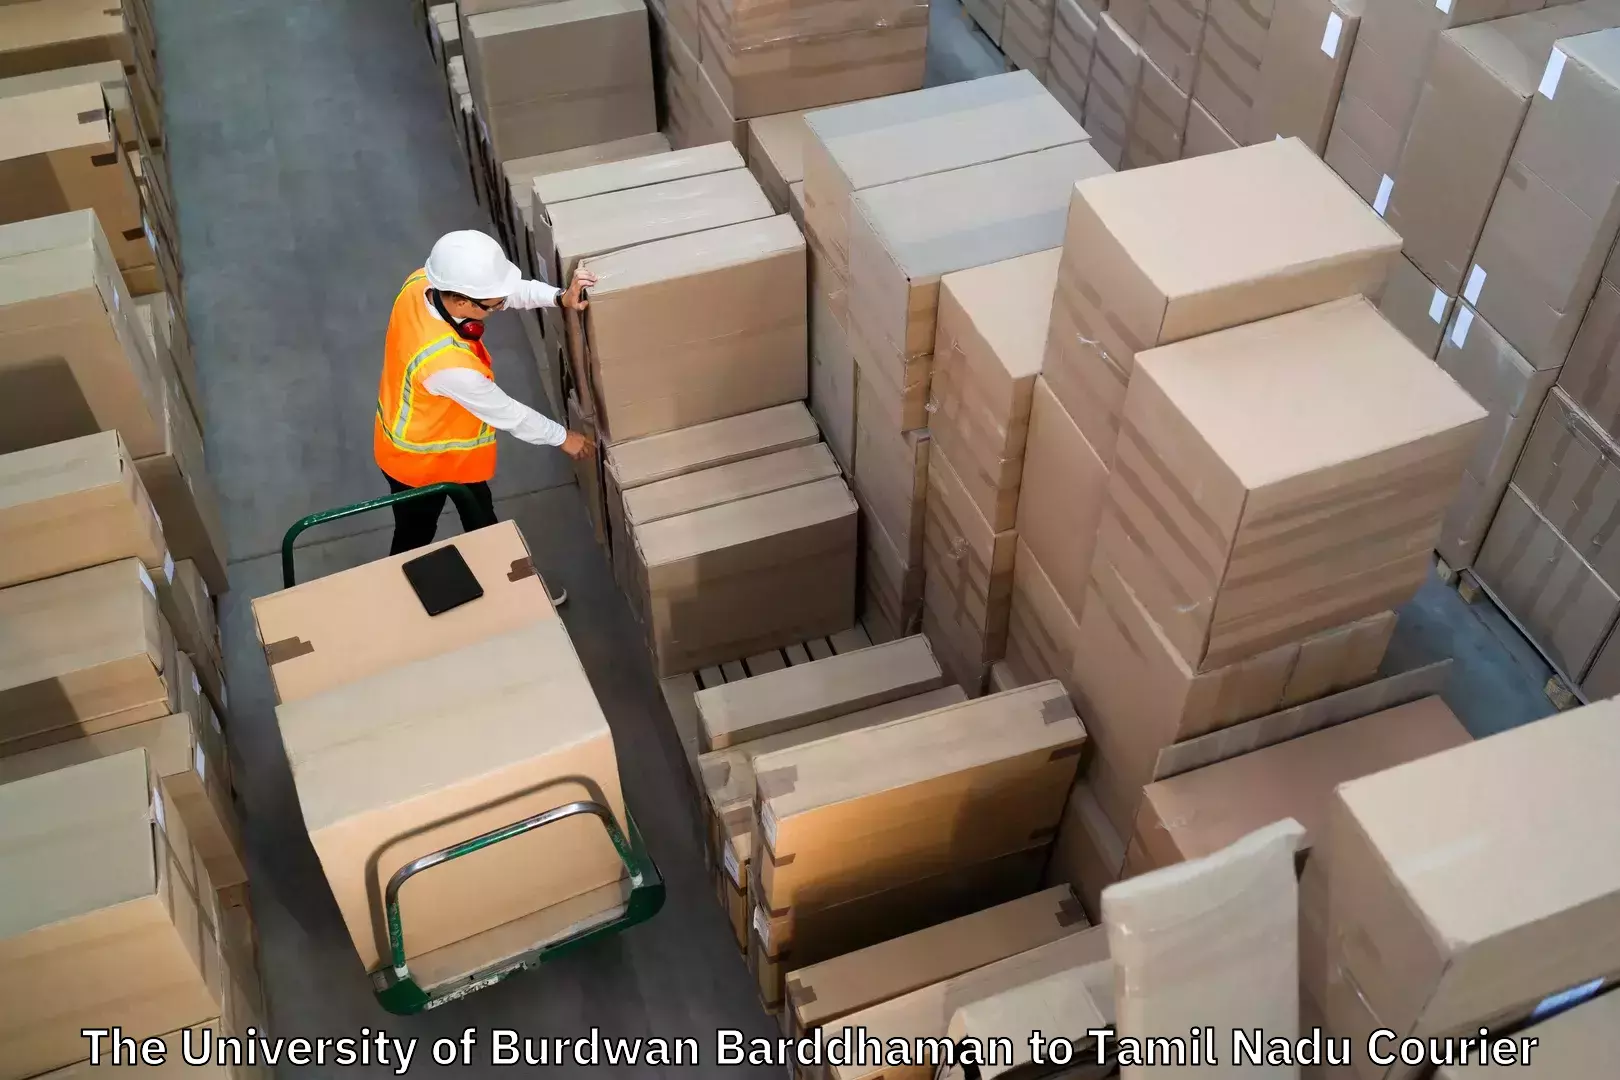 Luggage shipping service in The University of Burdwan Barddhaman to Papanasam